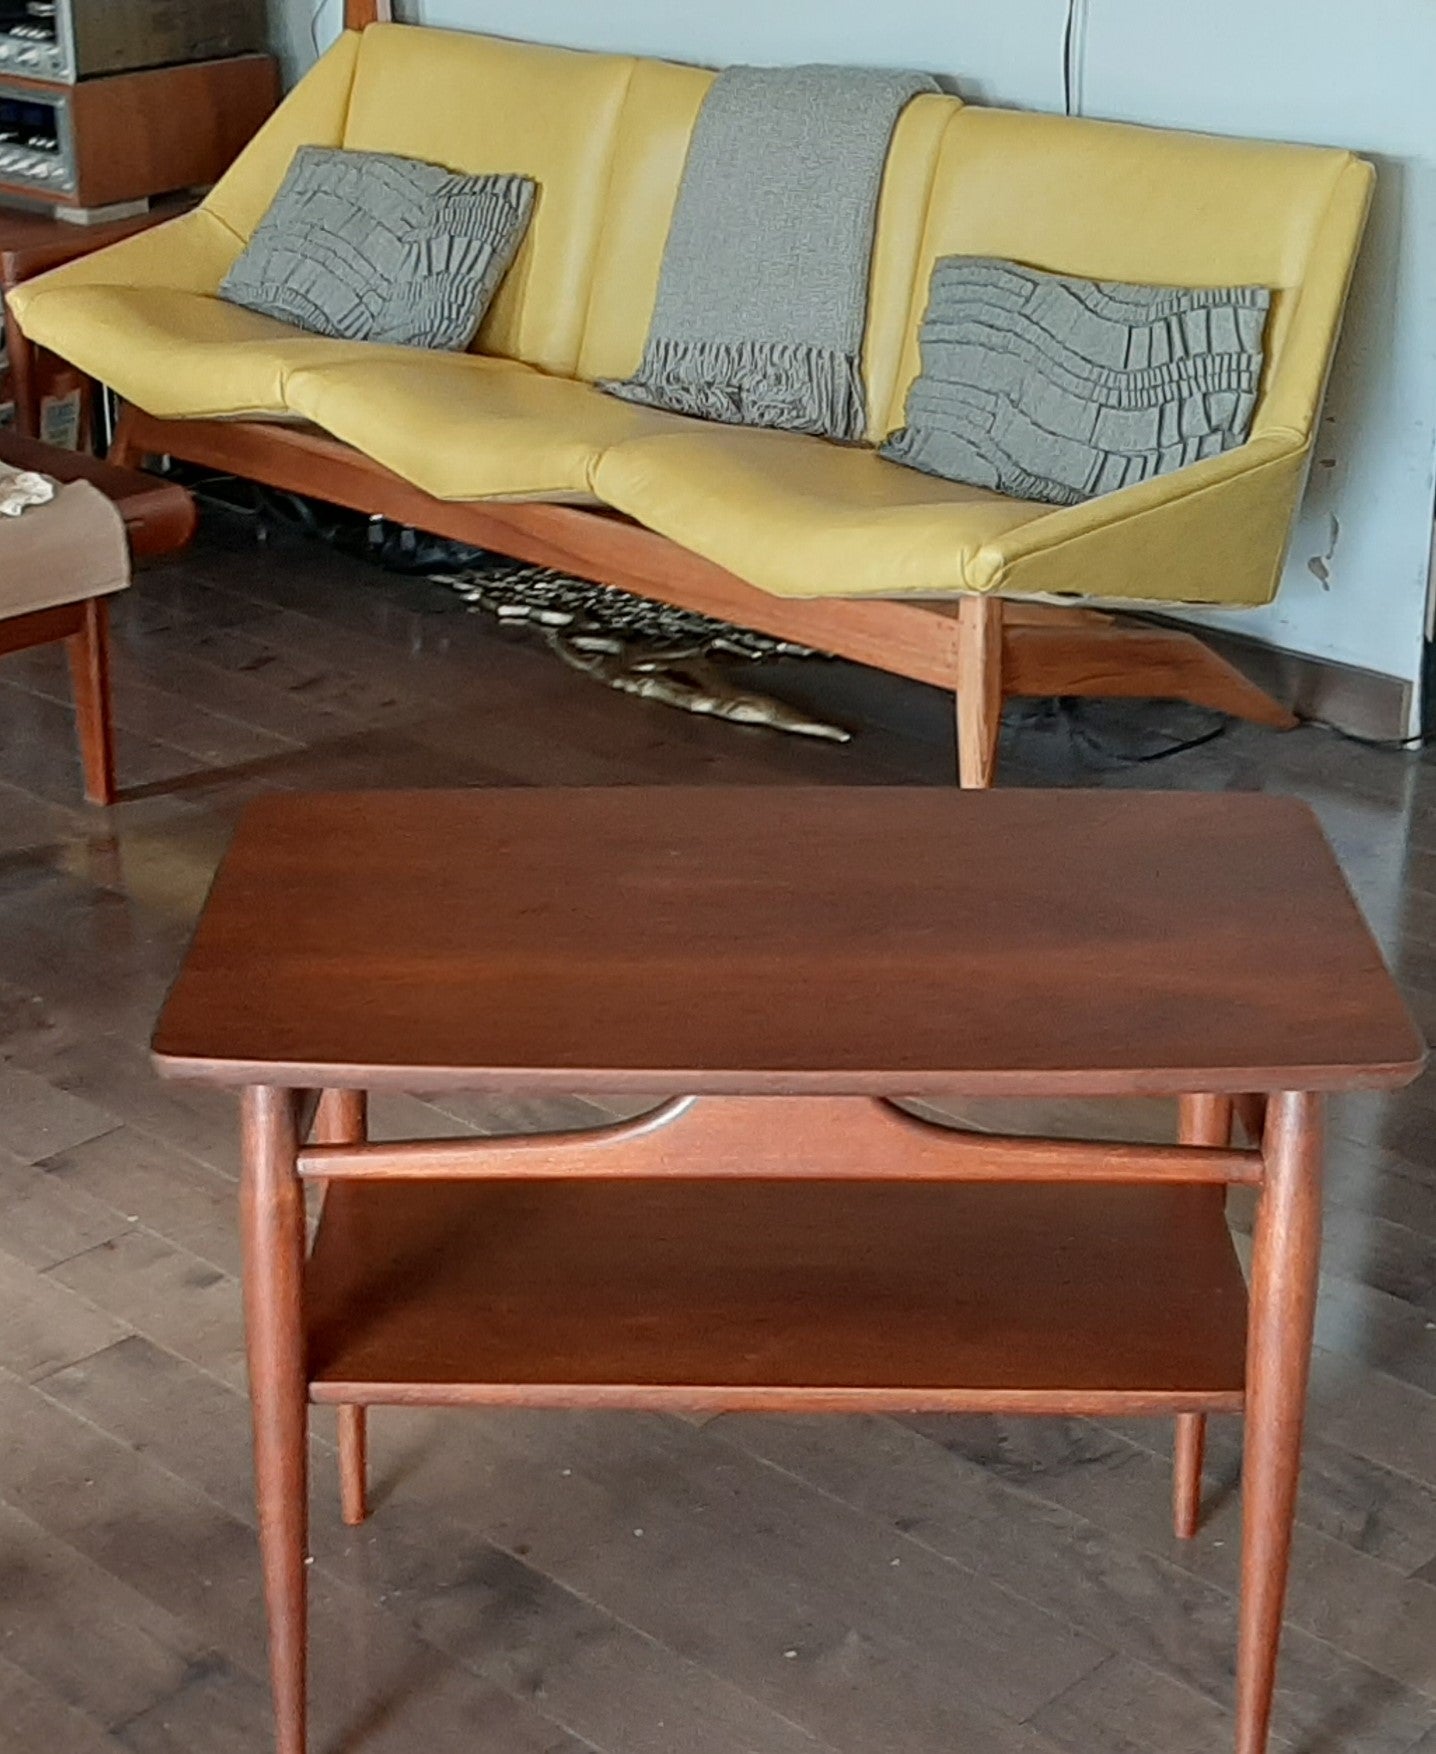 REFINISHED MCM Walnut End Table with Shelf, PERFECT